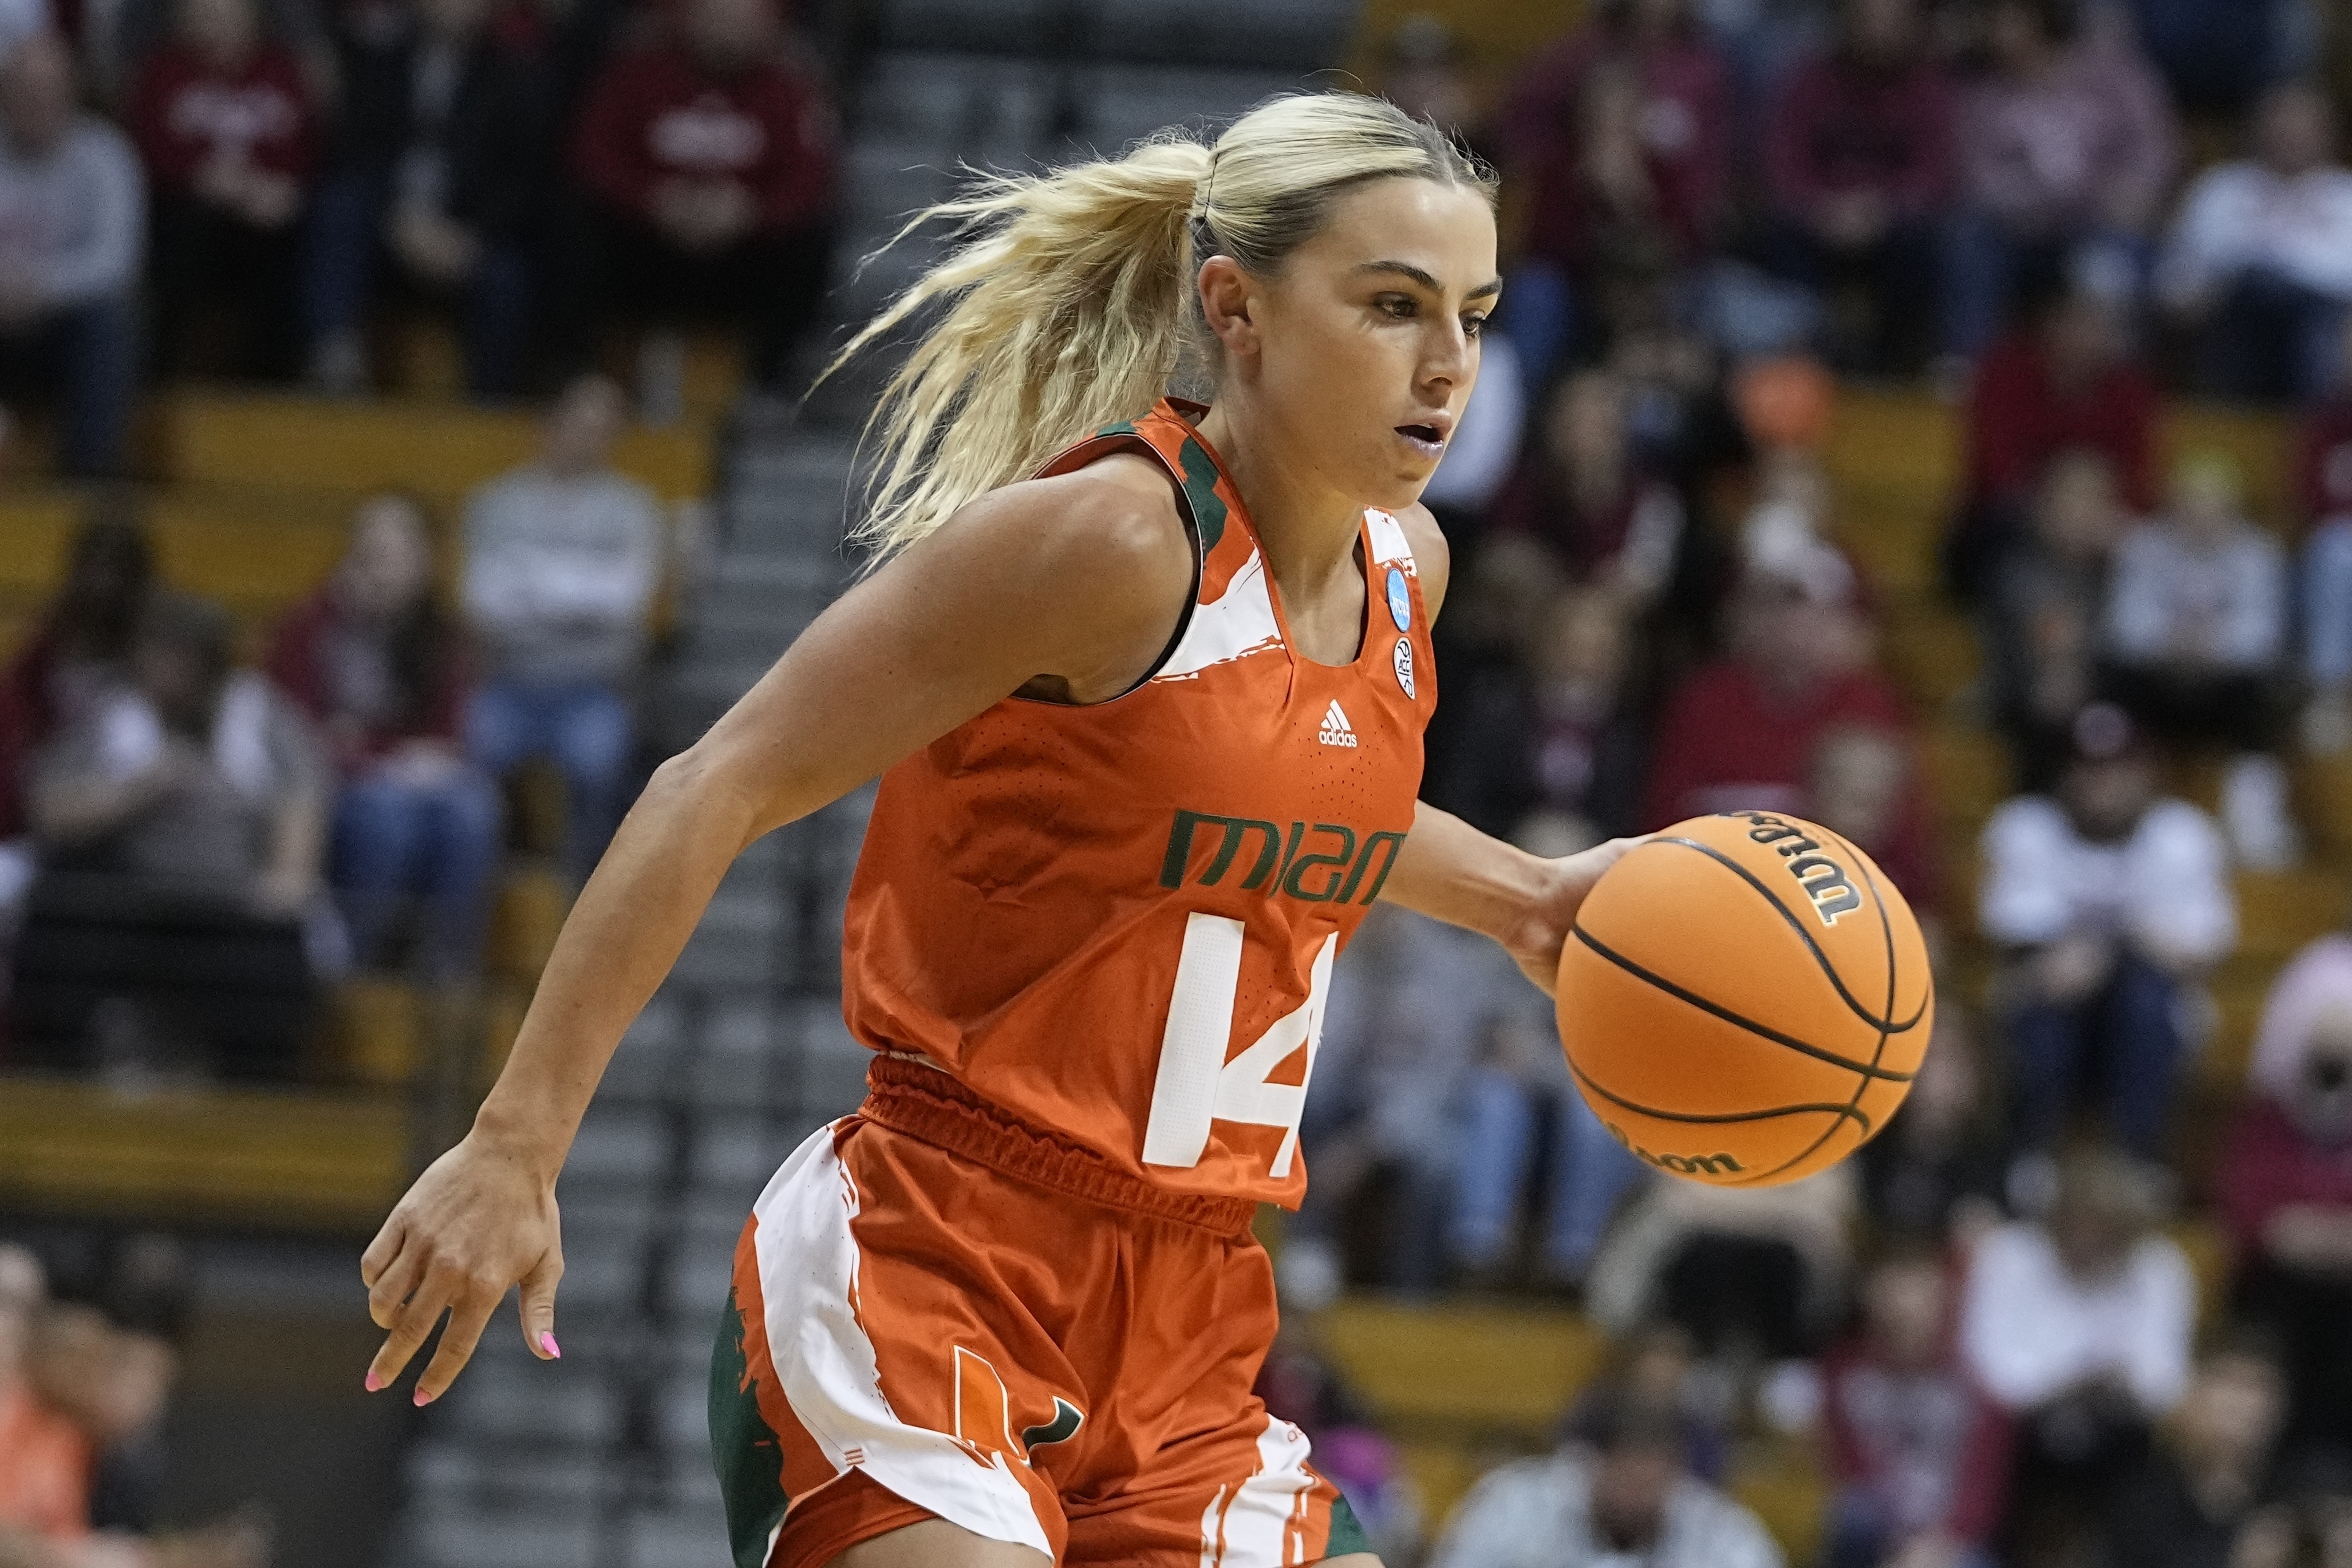 Hanna's twin Haley is also set to return to college basketball this season, having transferred to TCU